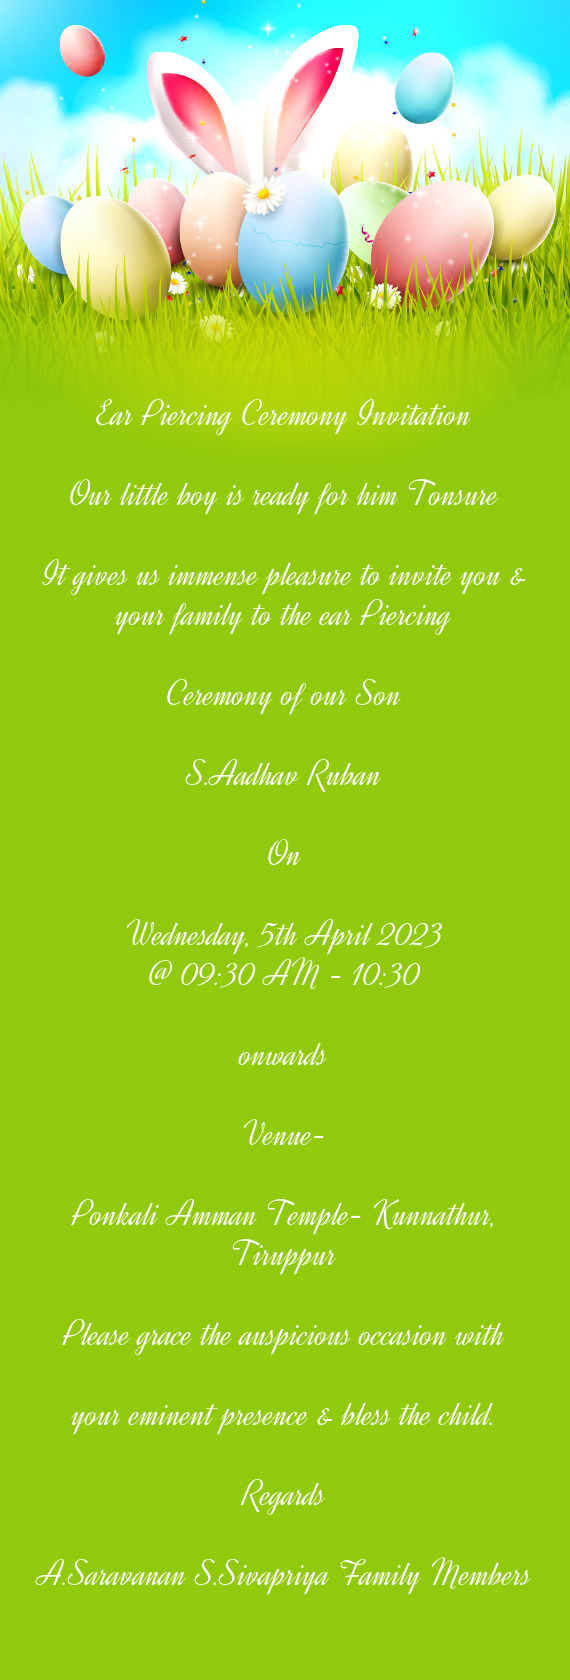 Leasure to invite you & your family to the ear Piercing Ceremony of our Son S